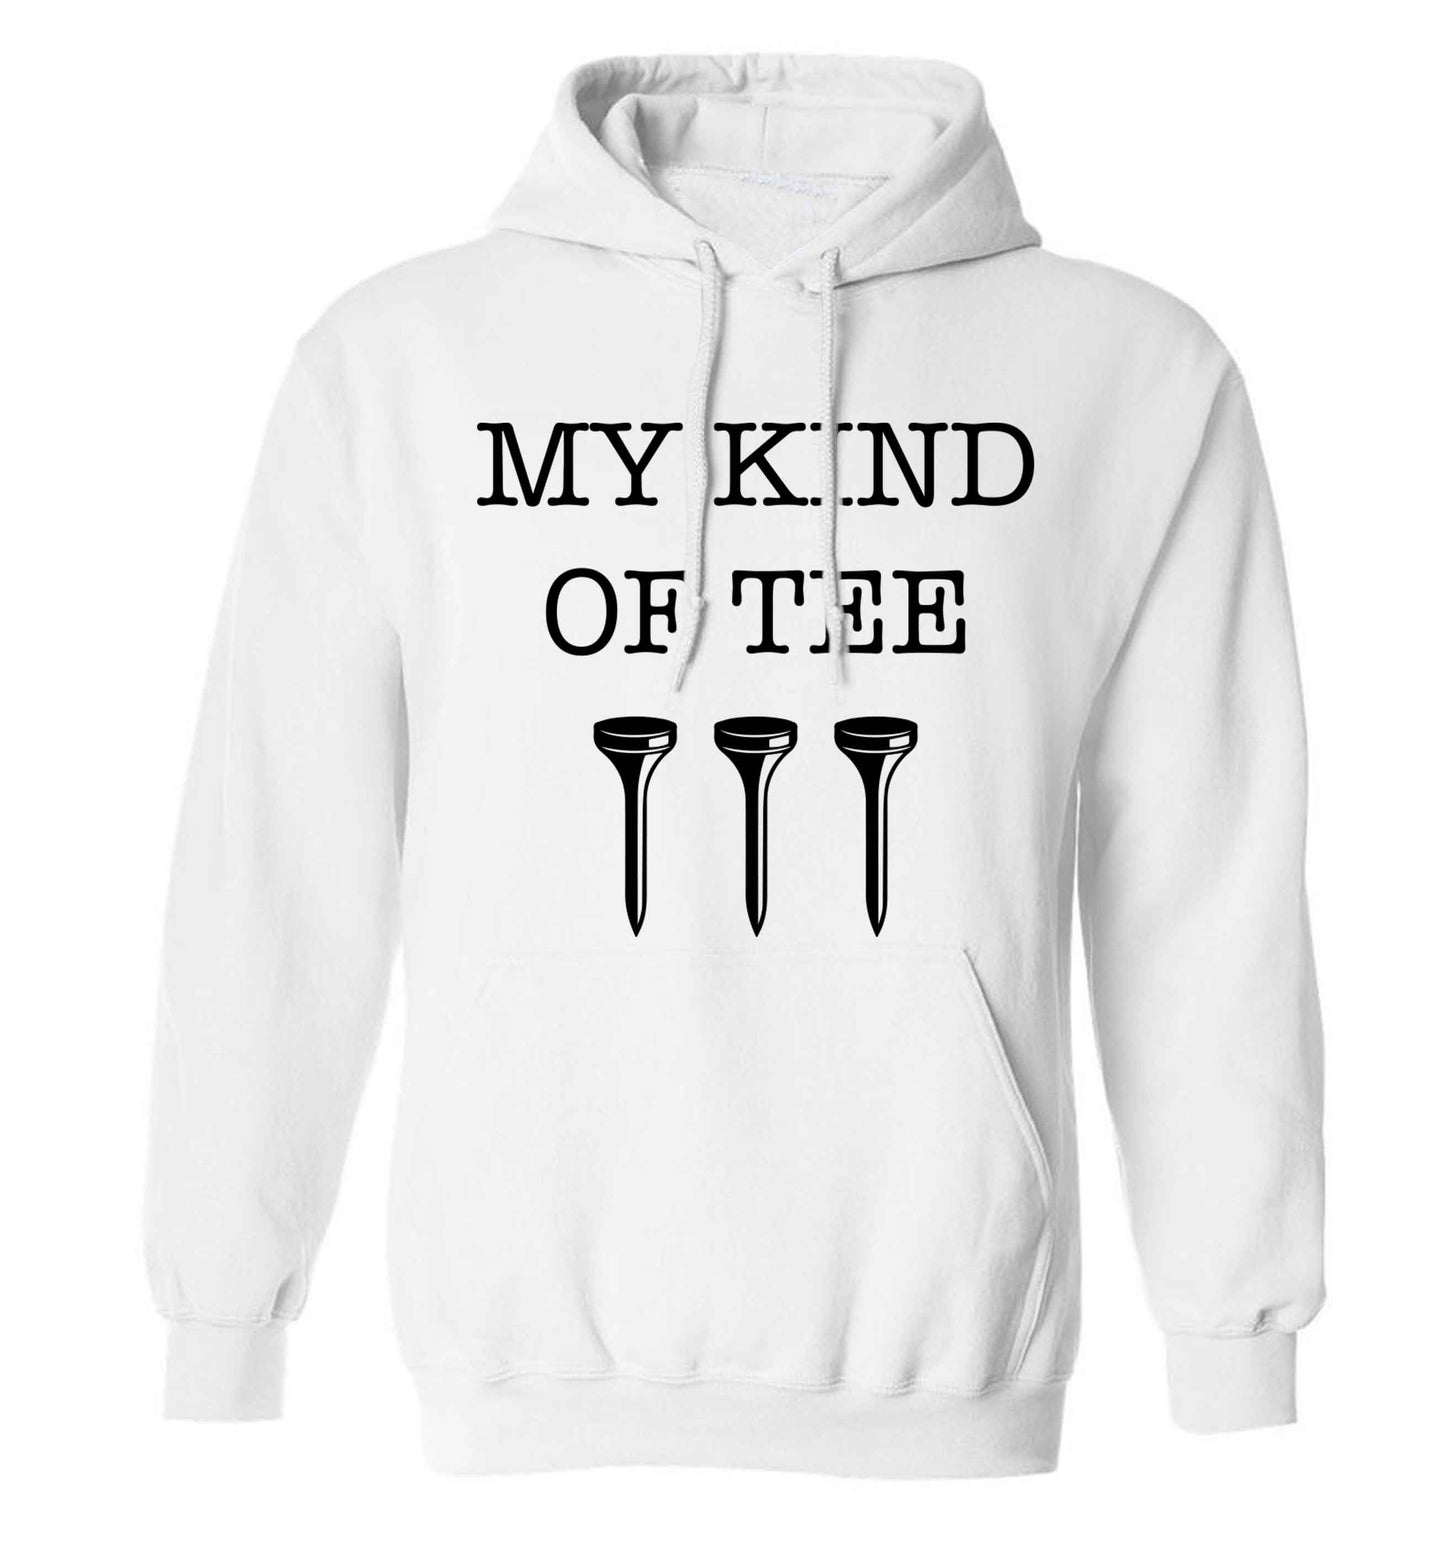 My kind of tee adults unisex white hoodie 2XL